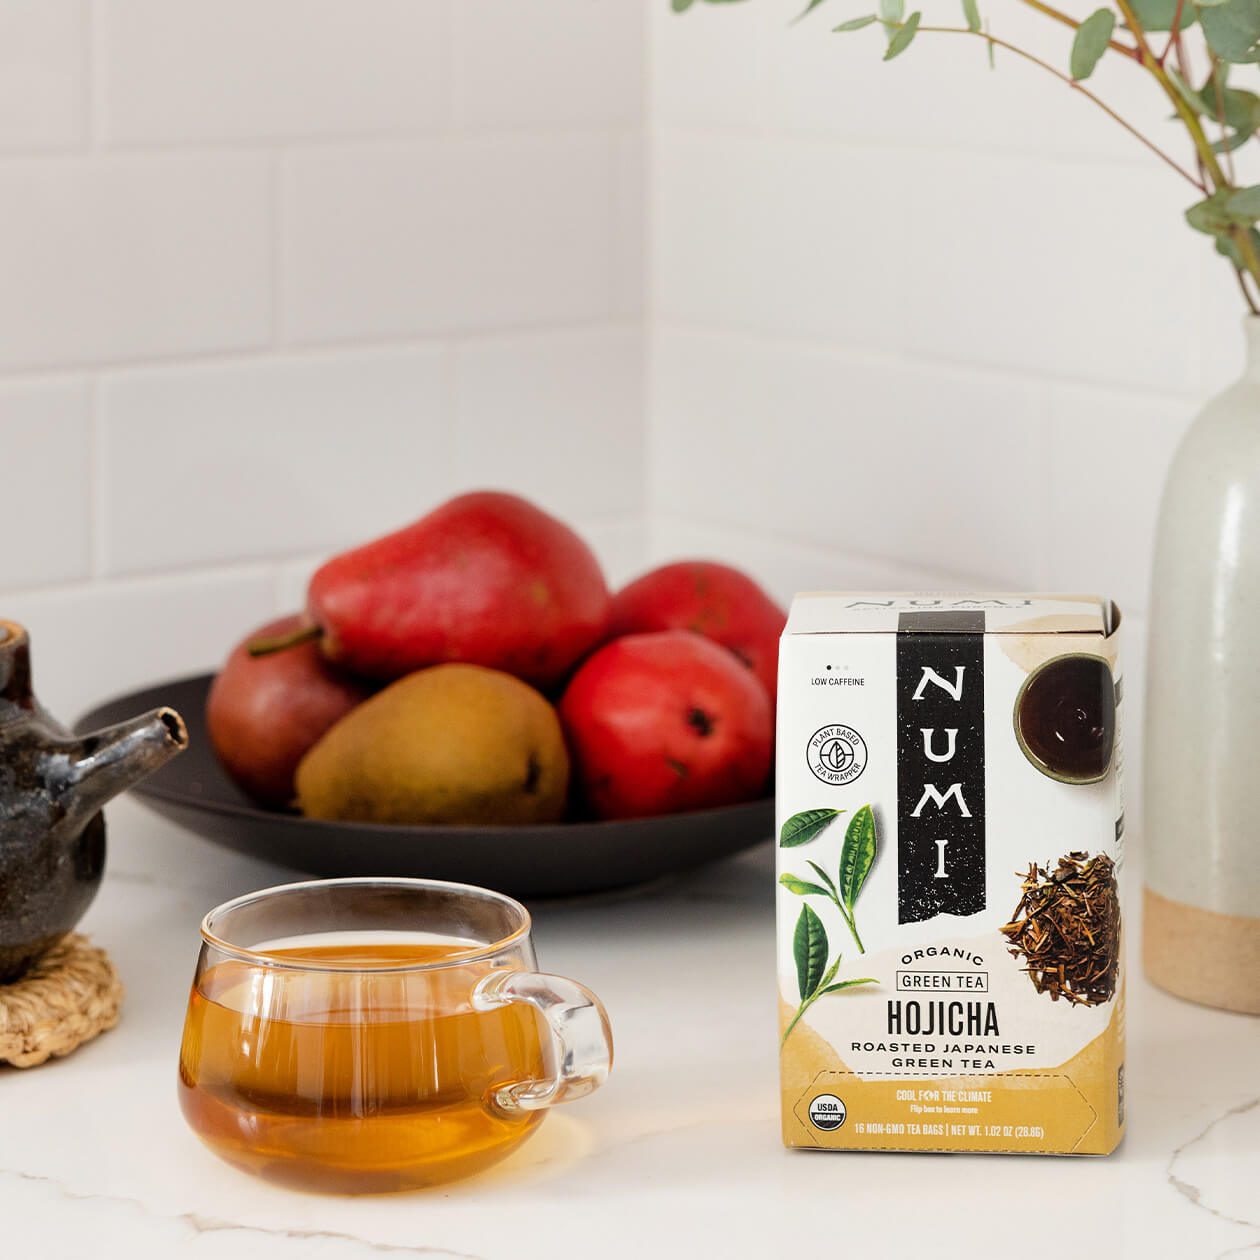 A cup of brewed Hojicha sitting on a kitchen counter with the Hojicha box